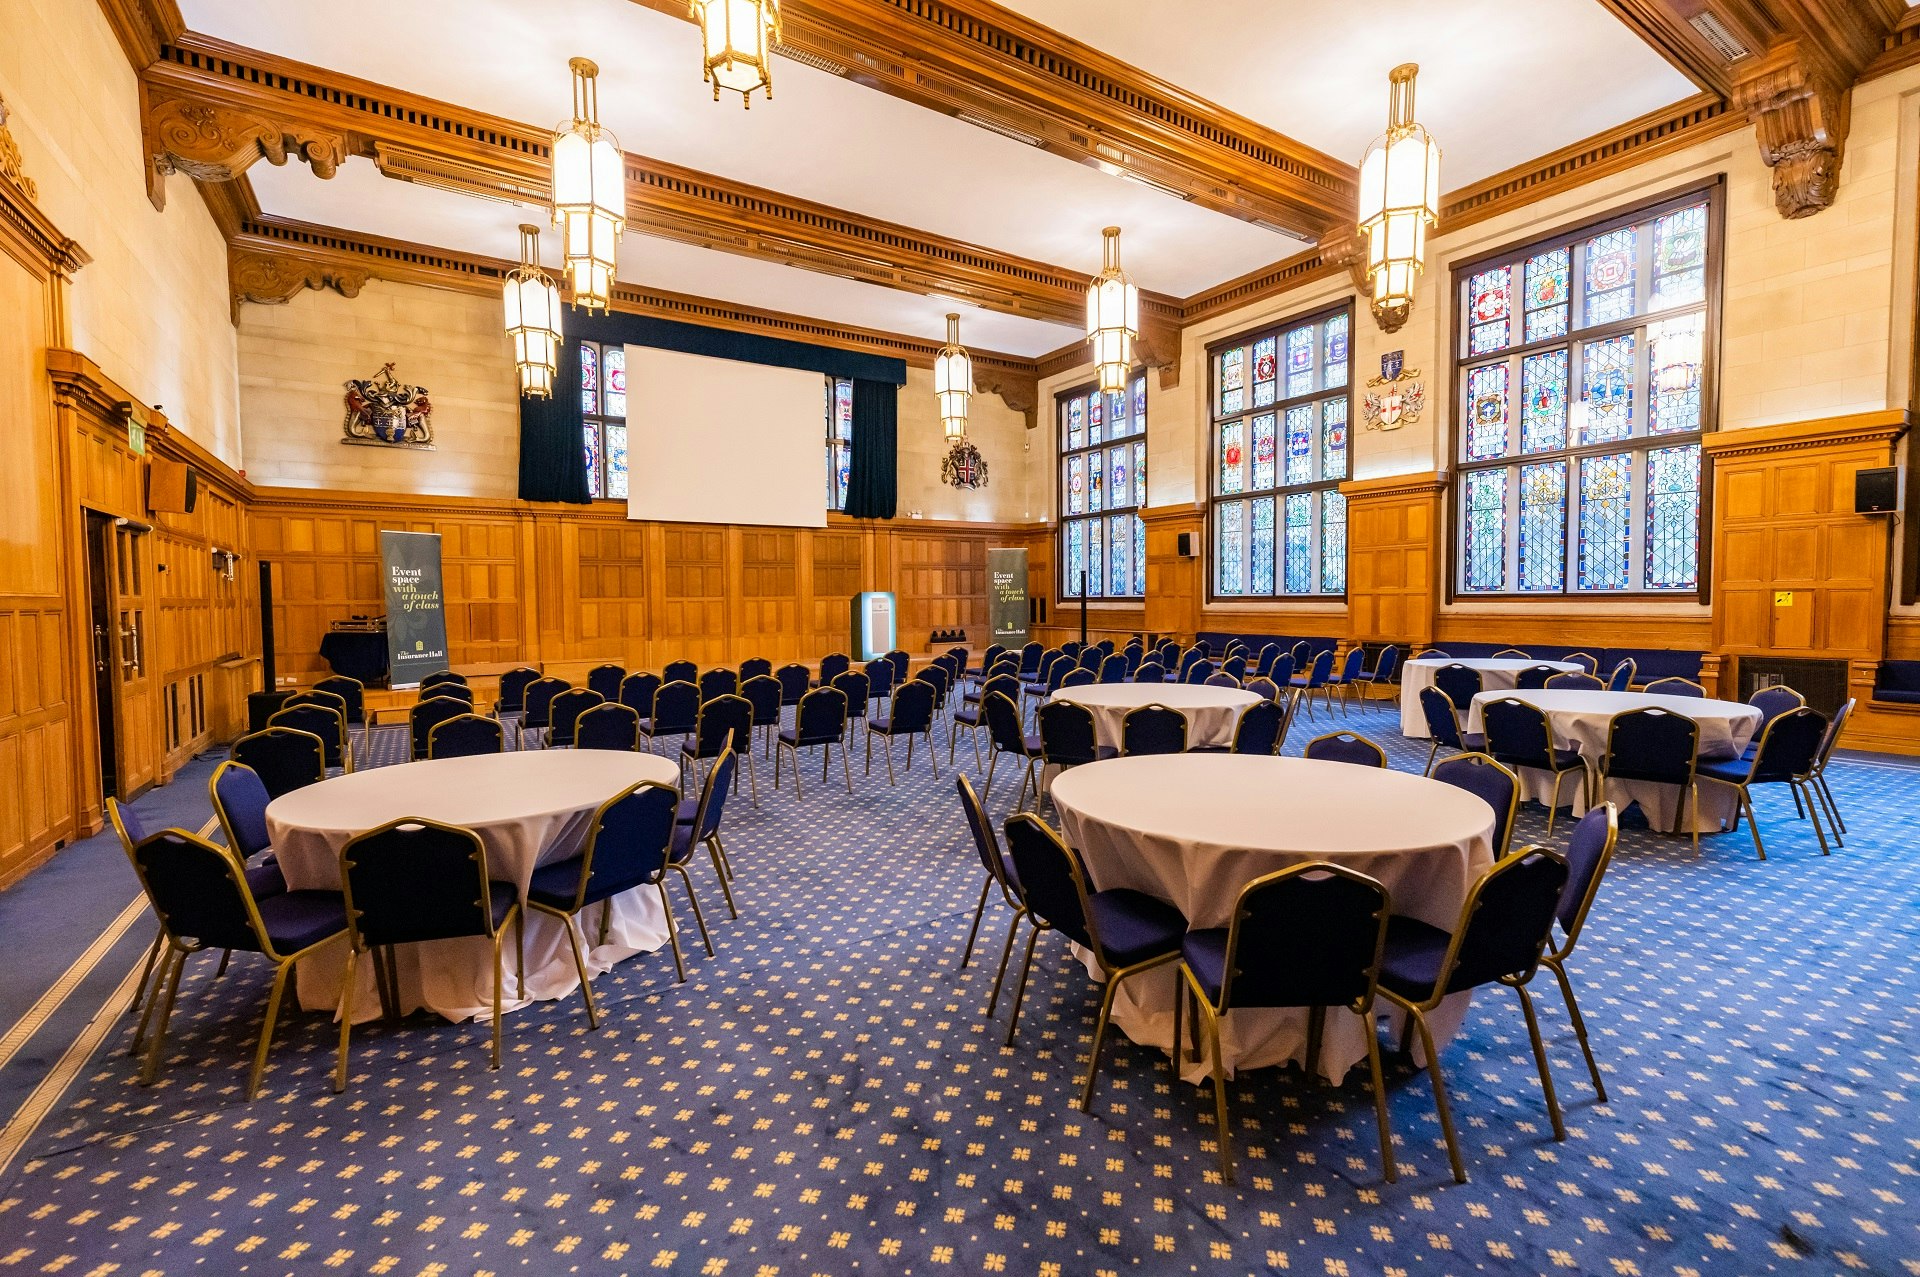 Product Launch Venues in Central London - The Insurance Hall